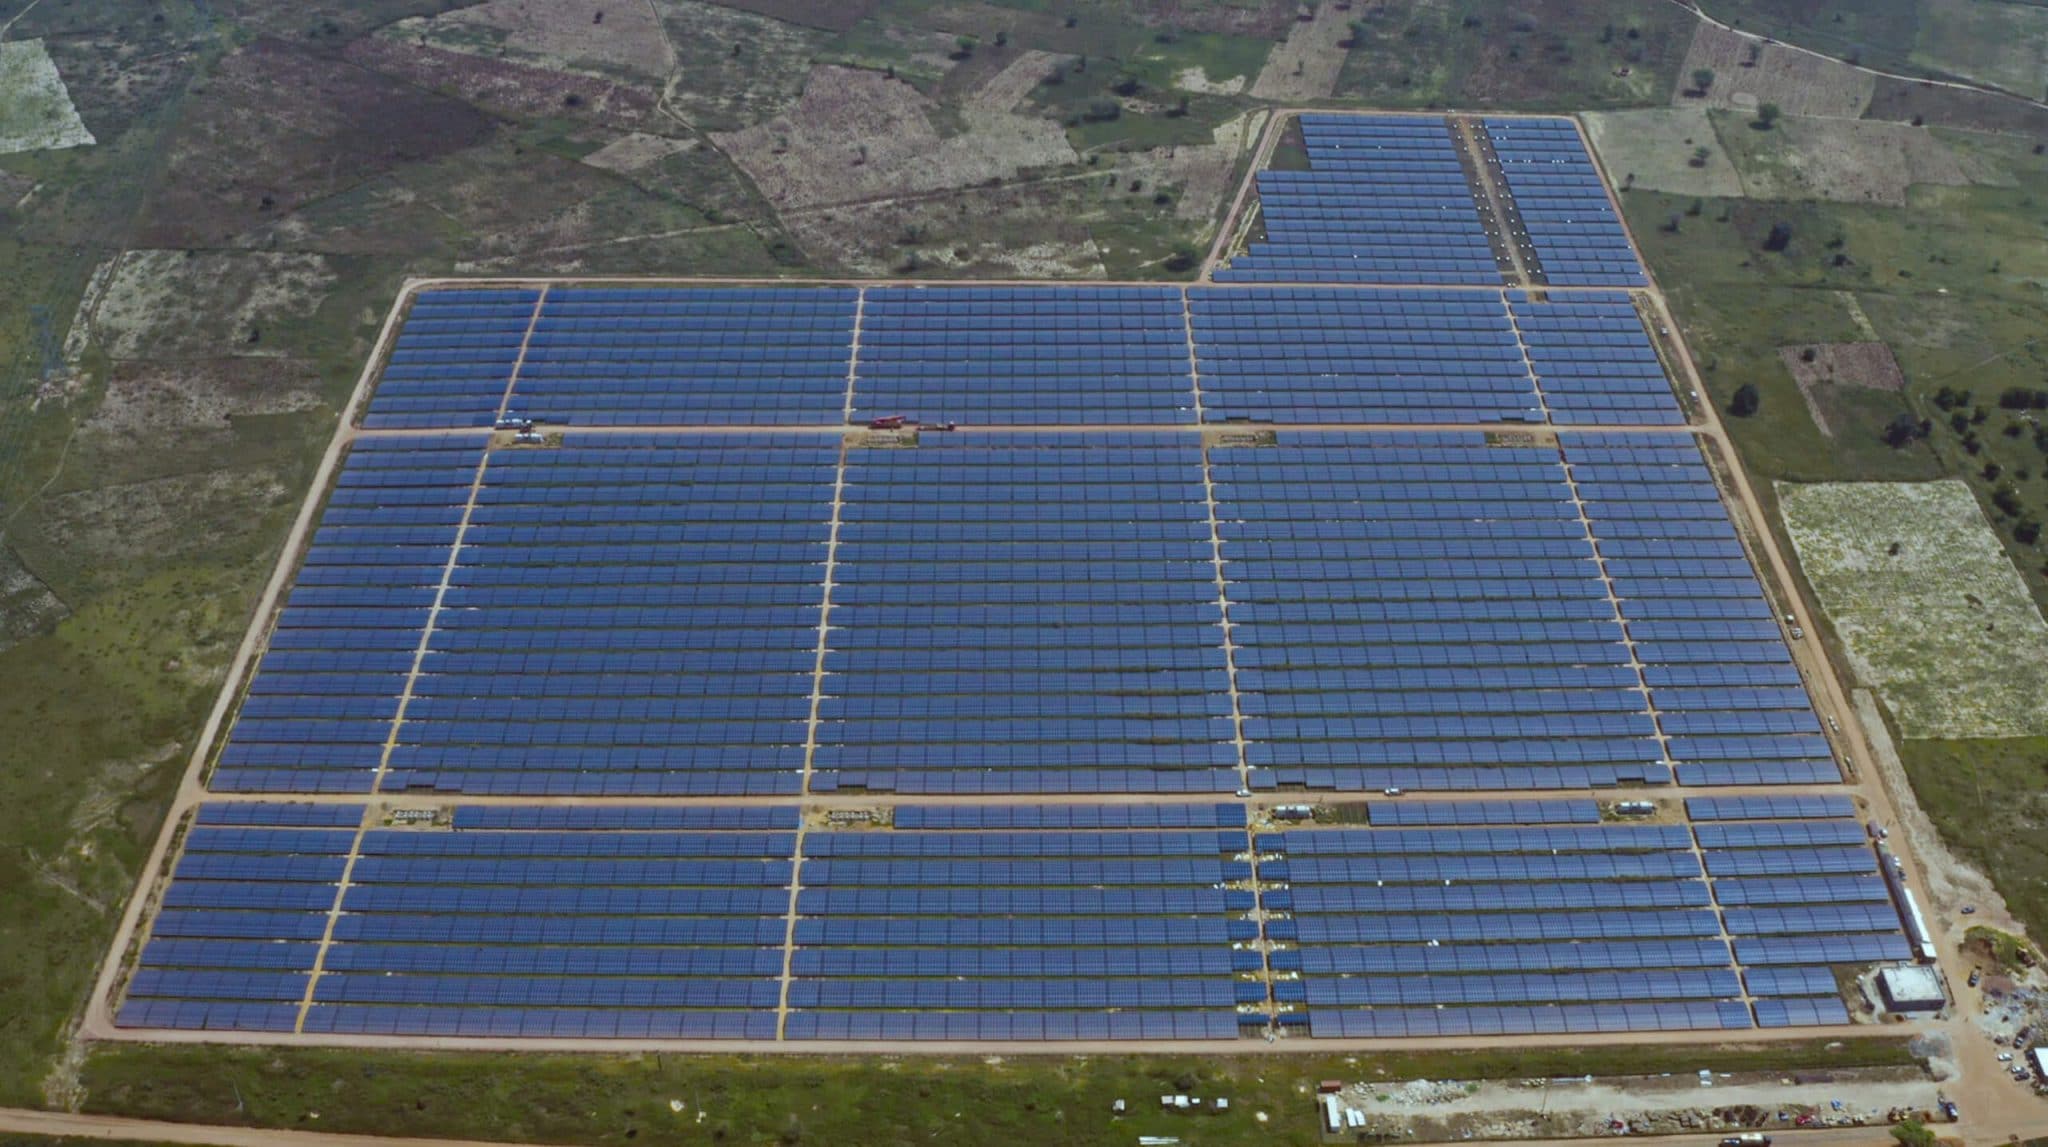 Aerial view of field of solar panels